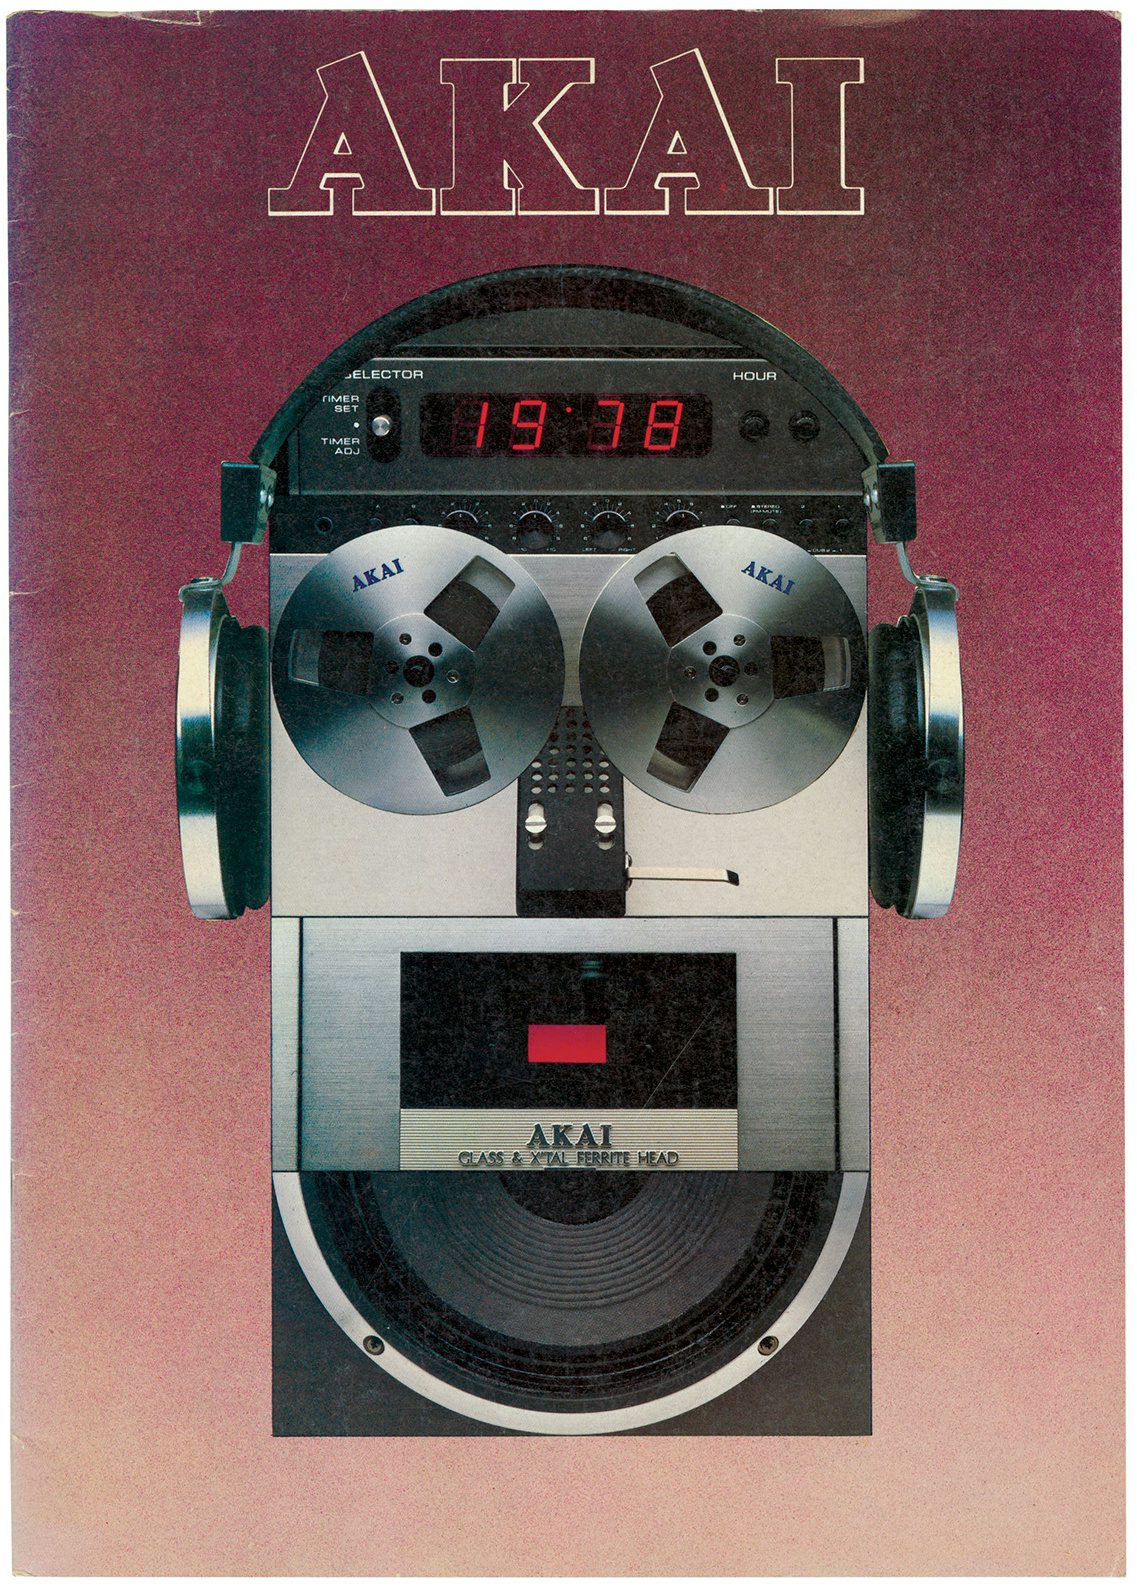 Pink hued poster featuring images of audio equipment which have been laid out to resemble a robotic face